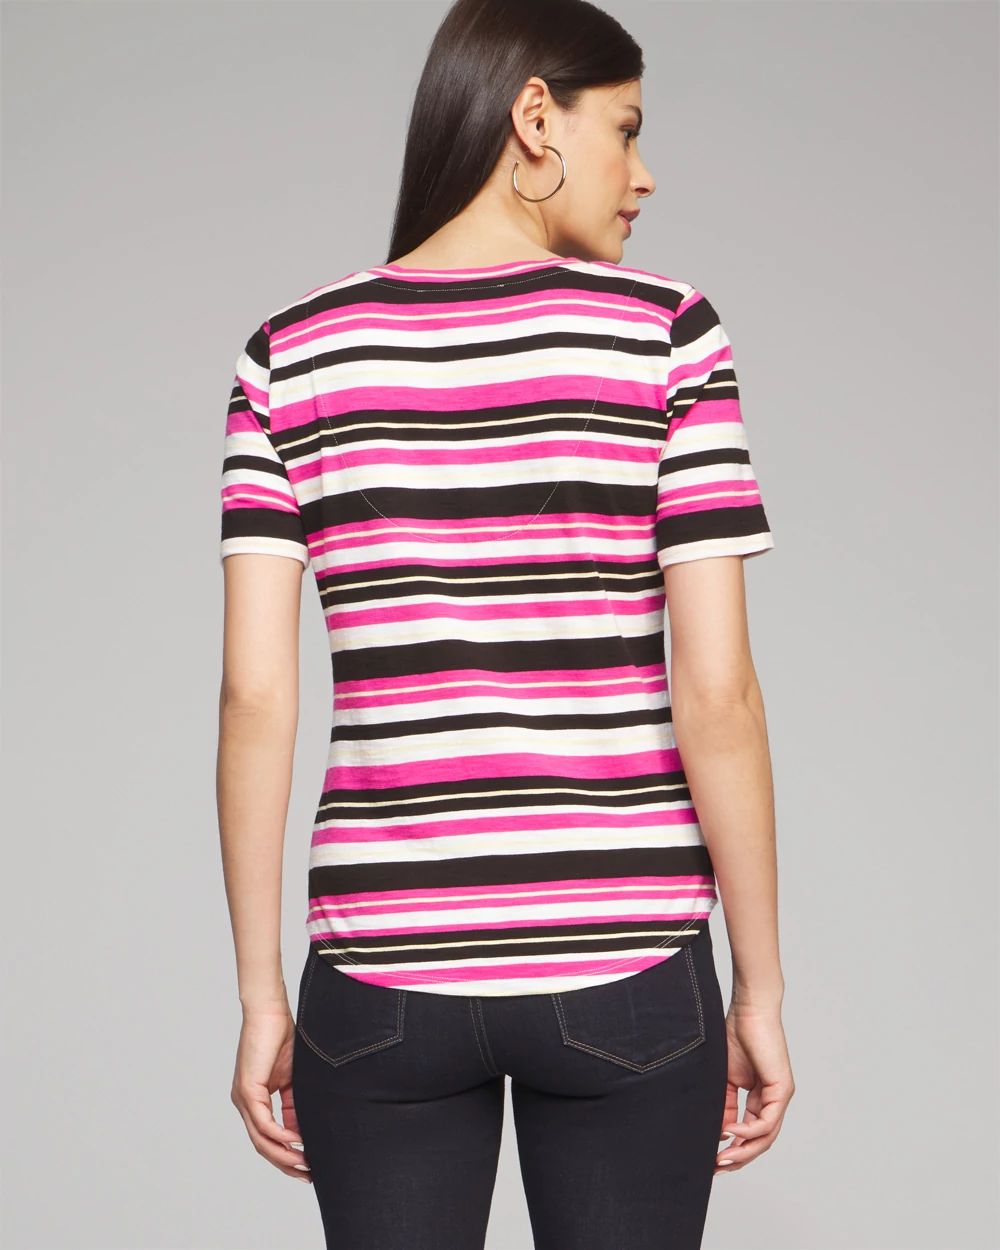 Outlet WHBM Short Sleeve V-Neck Foundation Tee click to view larger image.